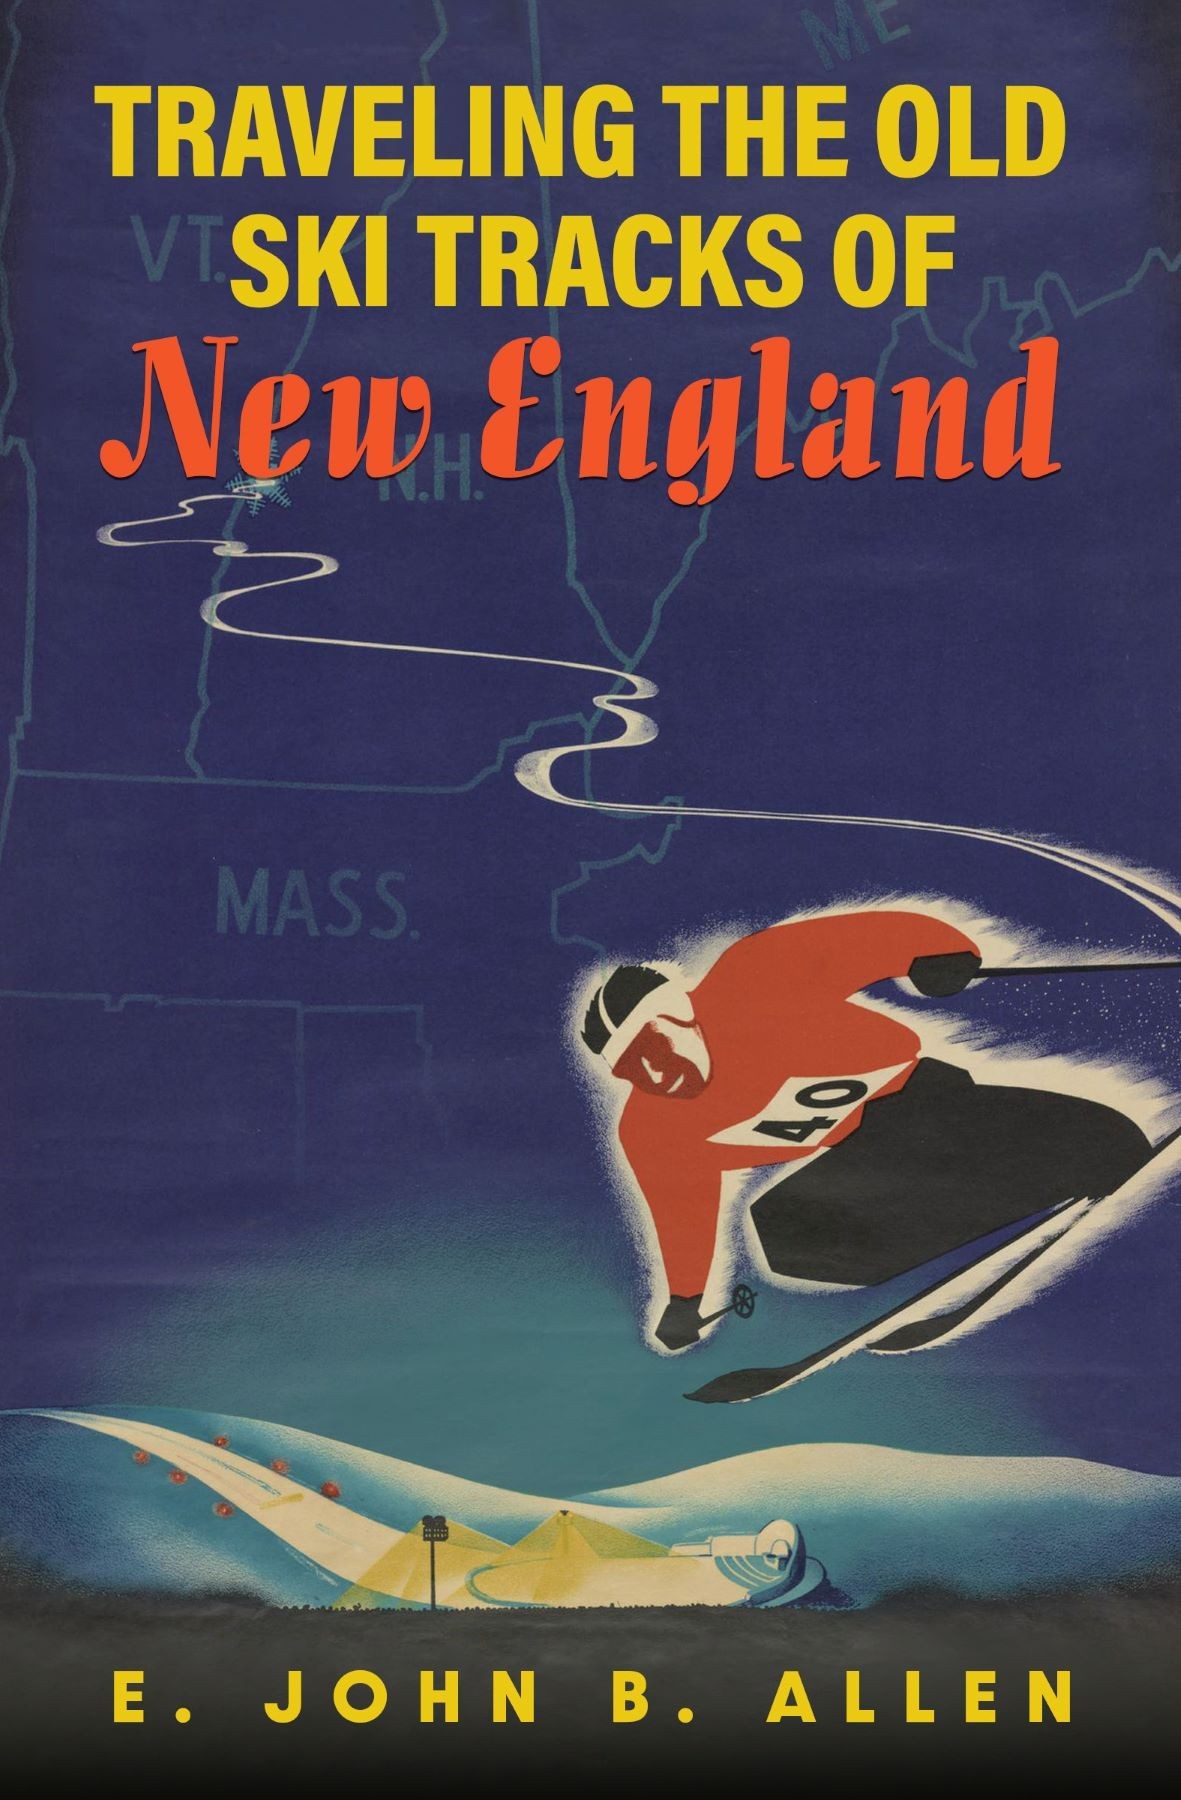 Book cover of 'TRAVELING THE OLD SKI TRACKS OF NEW ENGLAND' by E. JOHN B. ALLEN. The cover features a vintage-style illustration with a map of New England in the background and a skier in a red outfit racing downhill in the foreground. There are ski tracks winding down a snow-covered landscape with ski lifts and a snow cannon, set against a deep blue backdrop with the title in bold yellow and red letters.